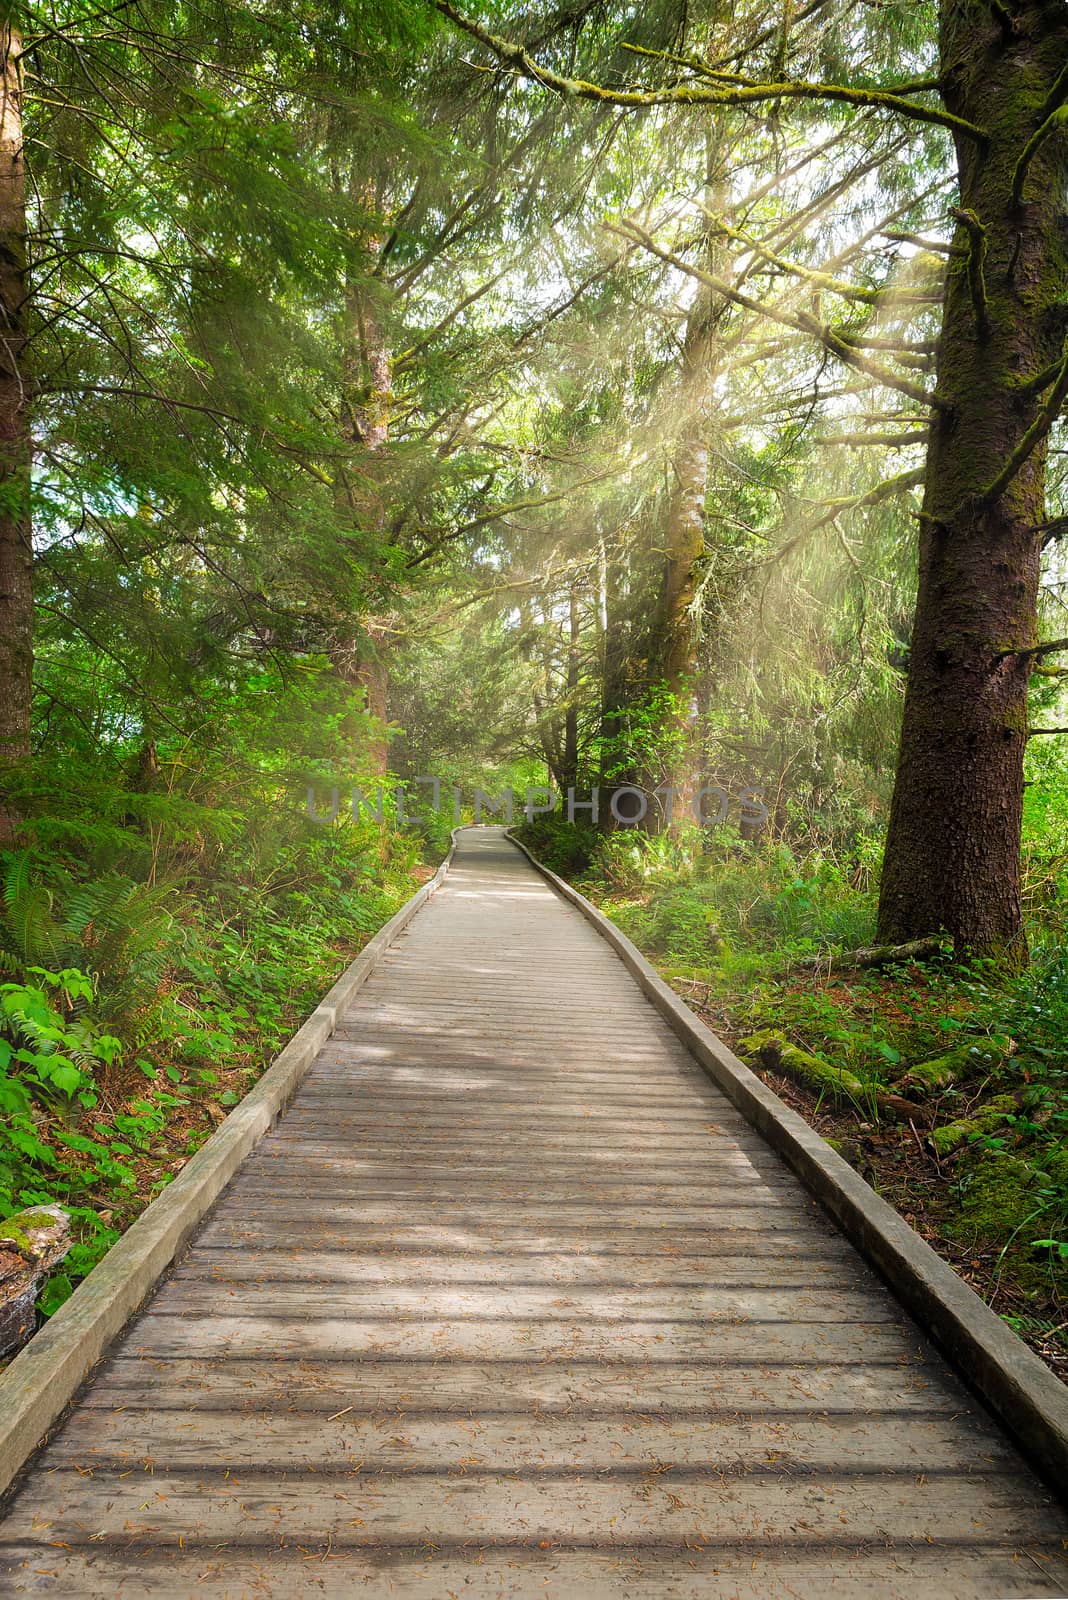 Boardwalk along Hiking Trail at Fort Clatsop by Davidgn